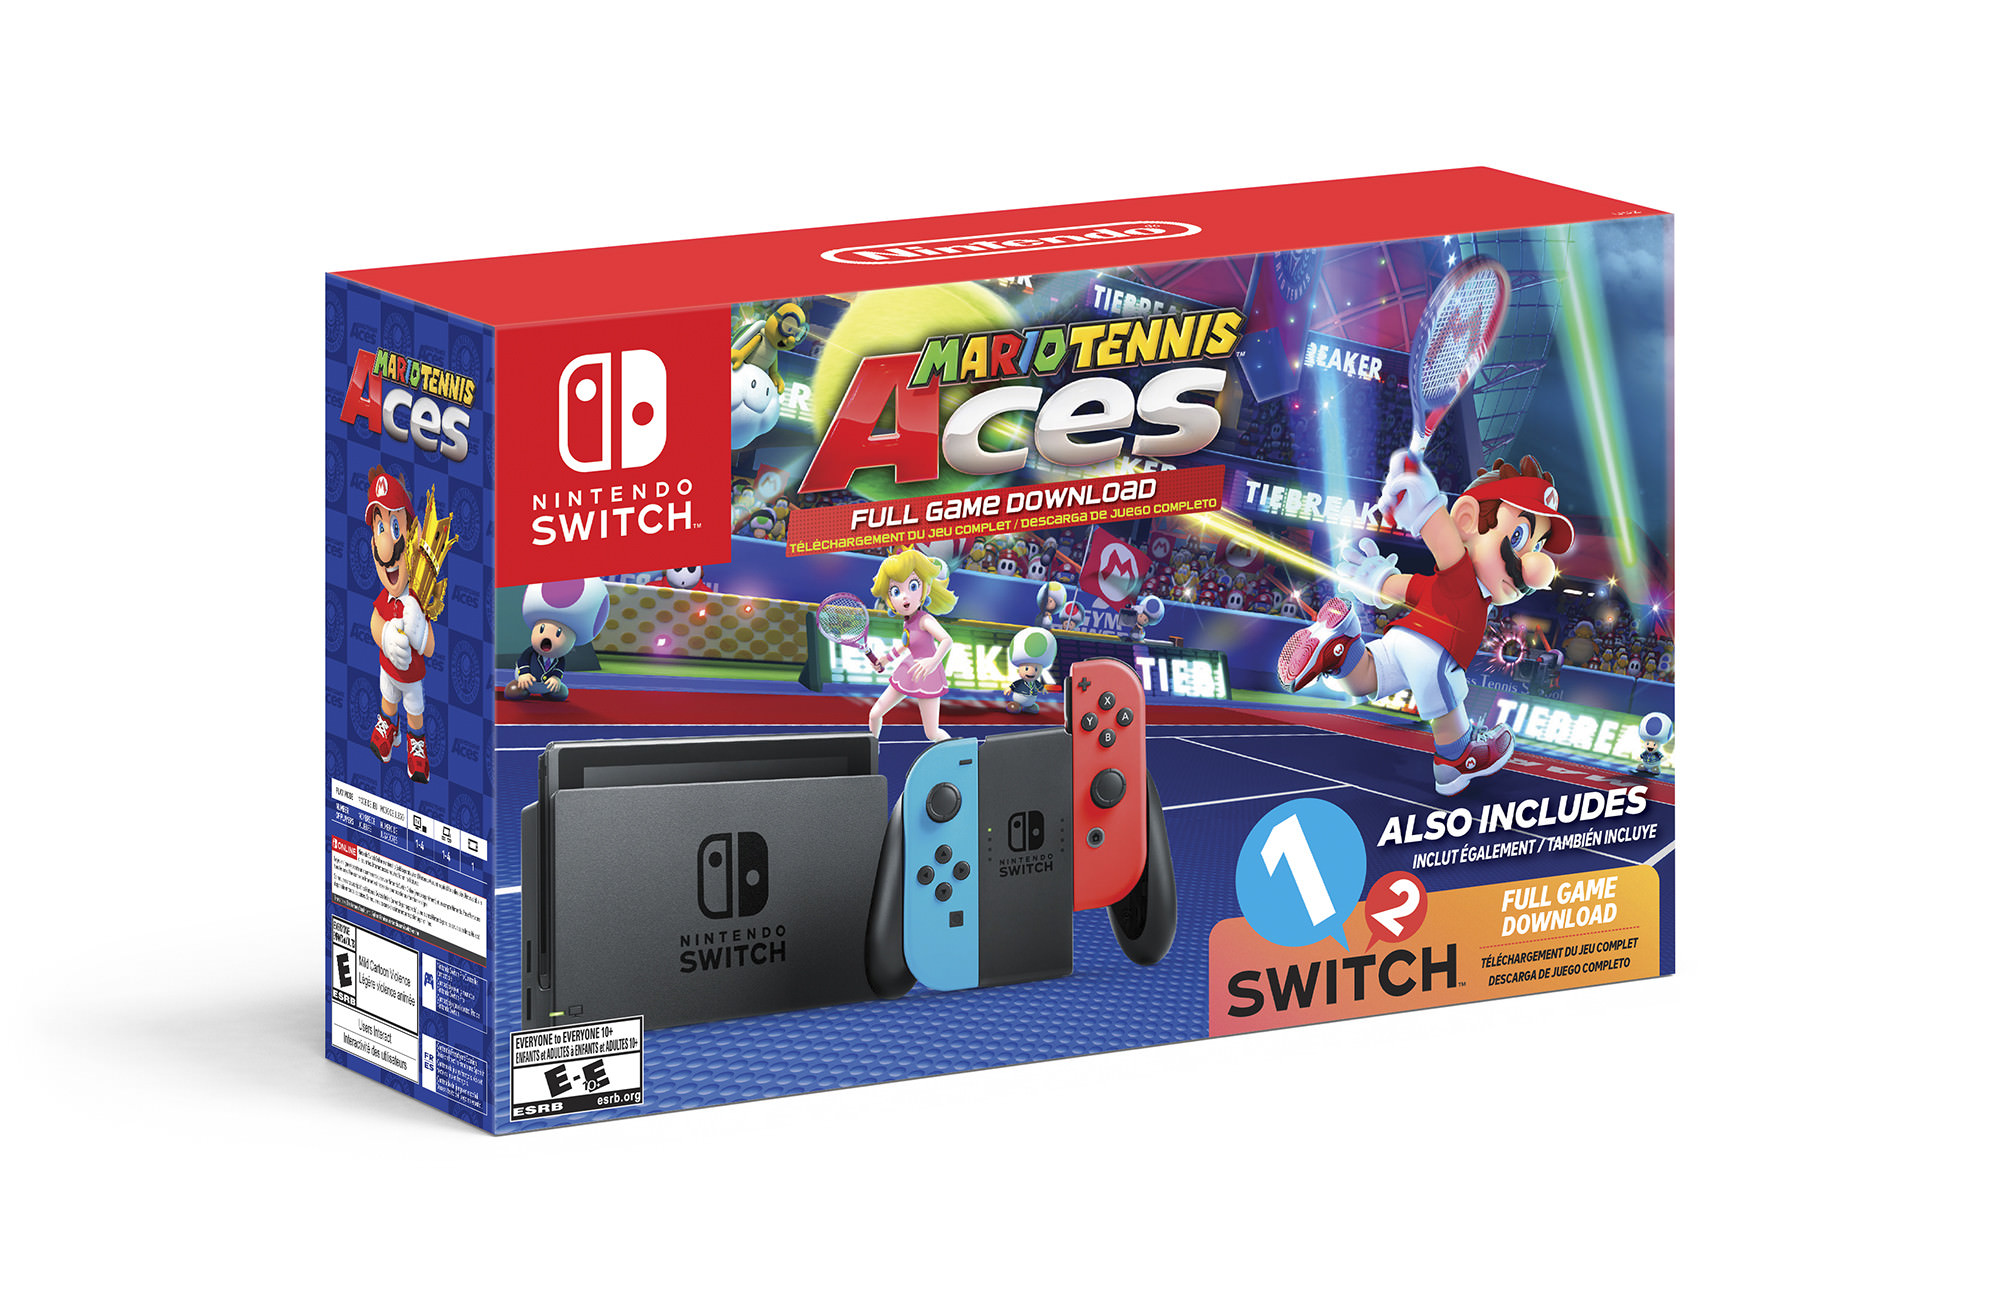 Nintendo Switch Console, Neon Blue & Neon Red with Mario Tennis Aces & 1-2-Switch - image 1 of 9